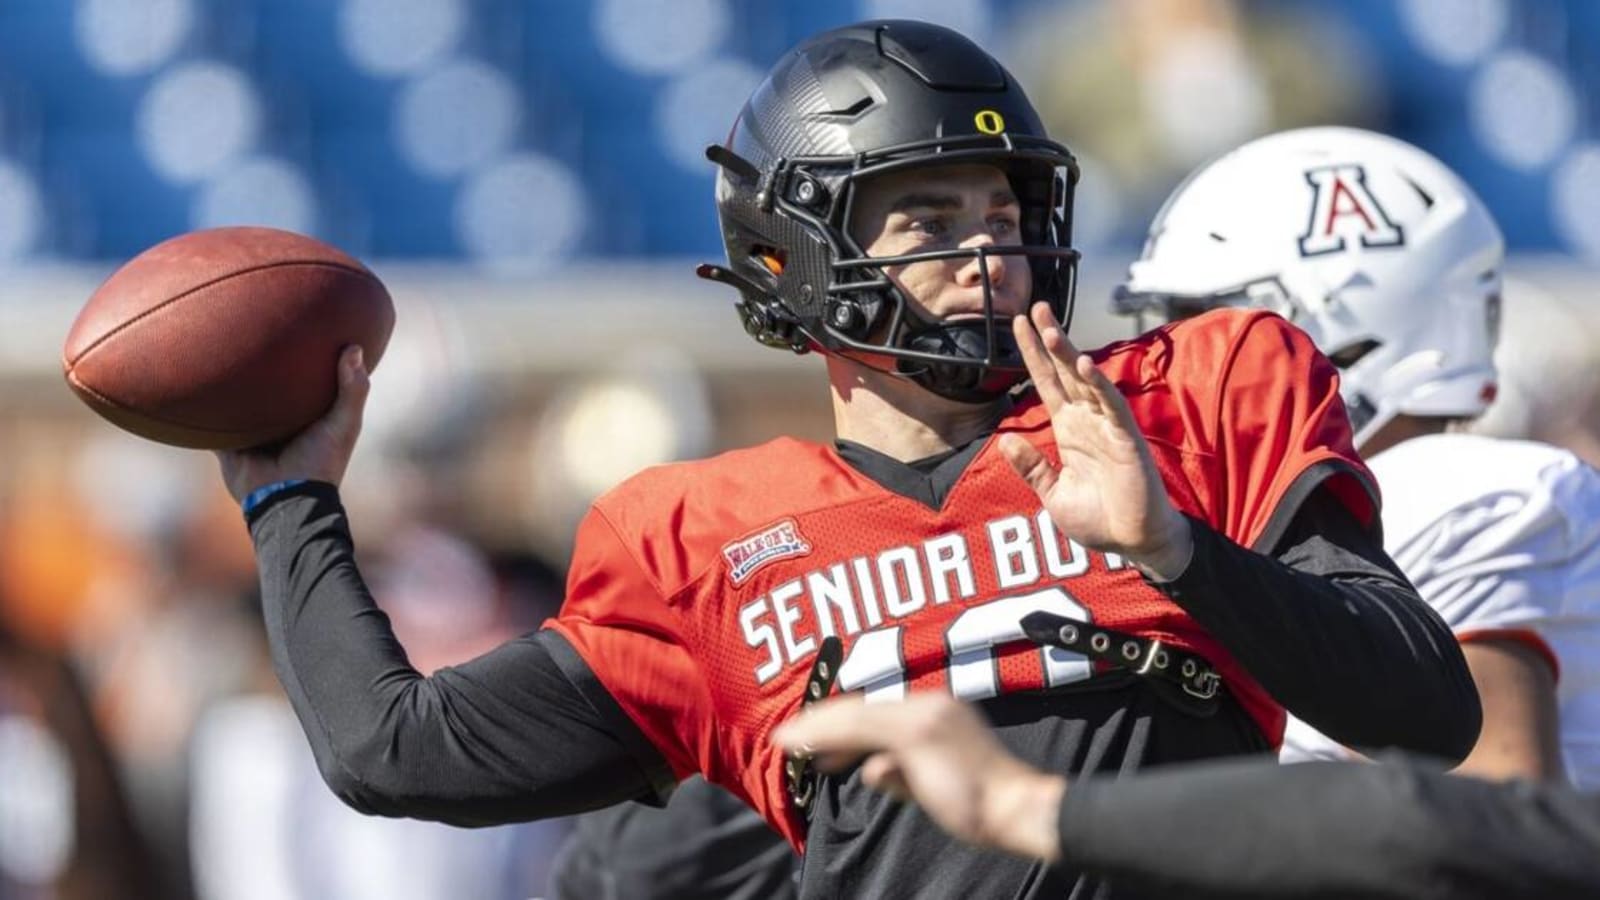 Bo Nix elaborates on his Senior Bowl experience, why he decided to play in the game